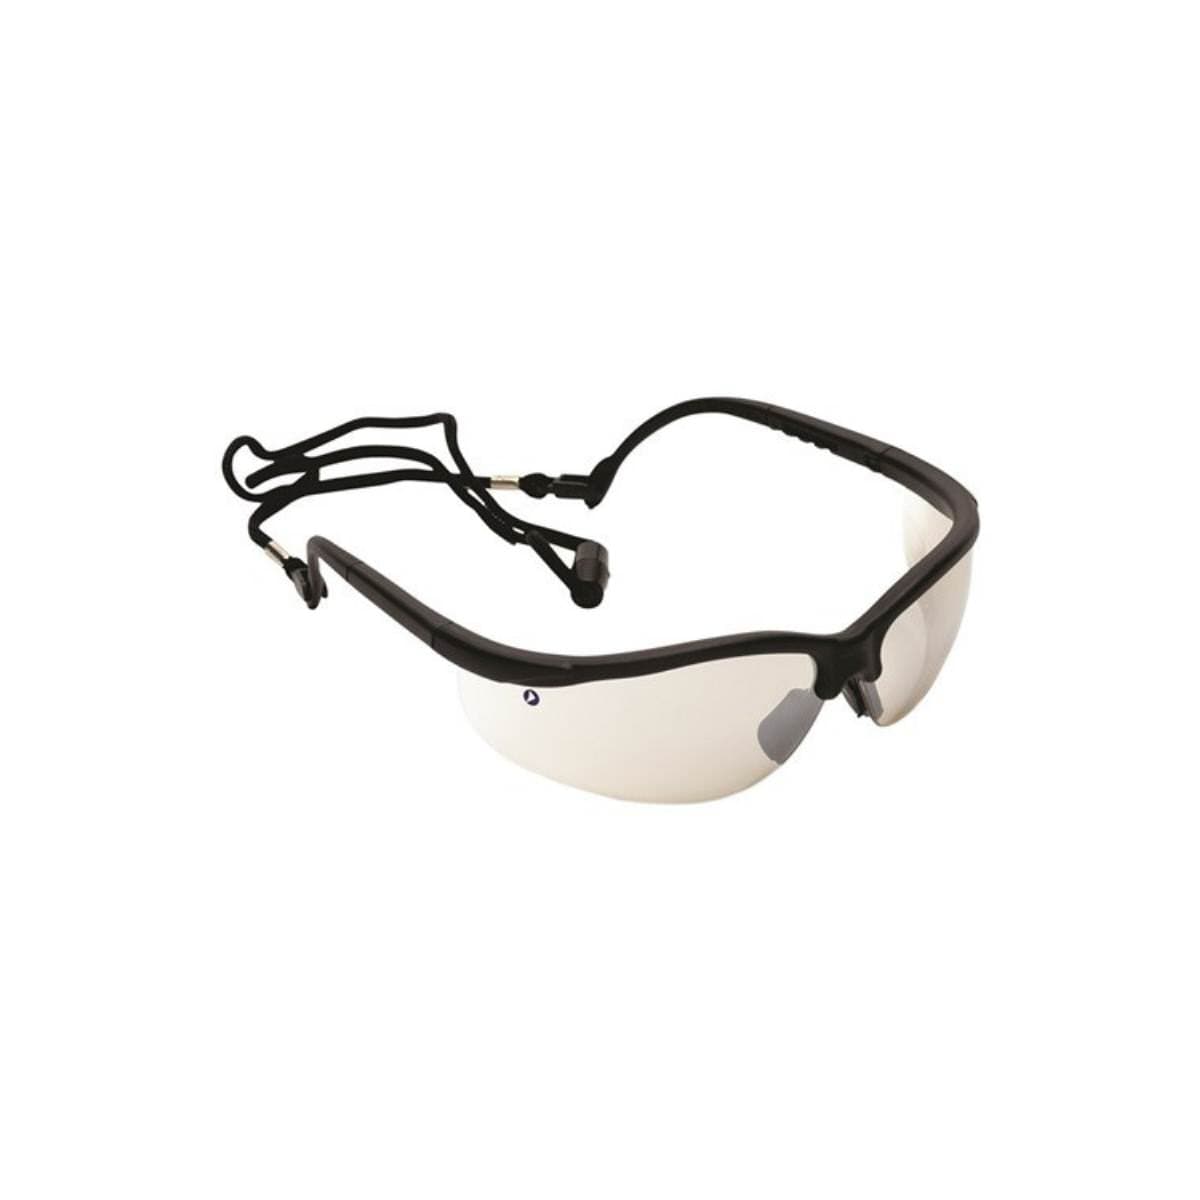 Fusion Safety Glasses Clear Lens 9200 (Pack of 12)